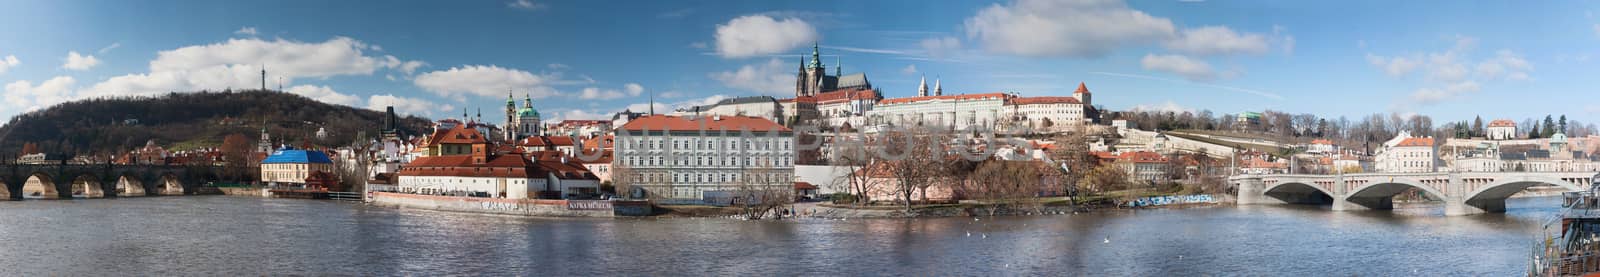 Panorama of Prague in winter
 by A-dam